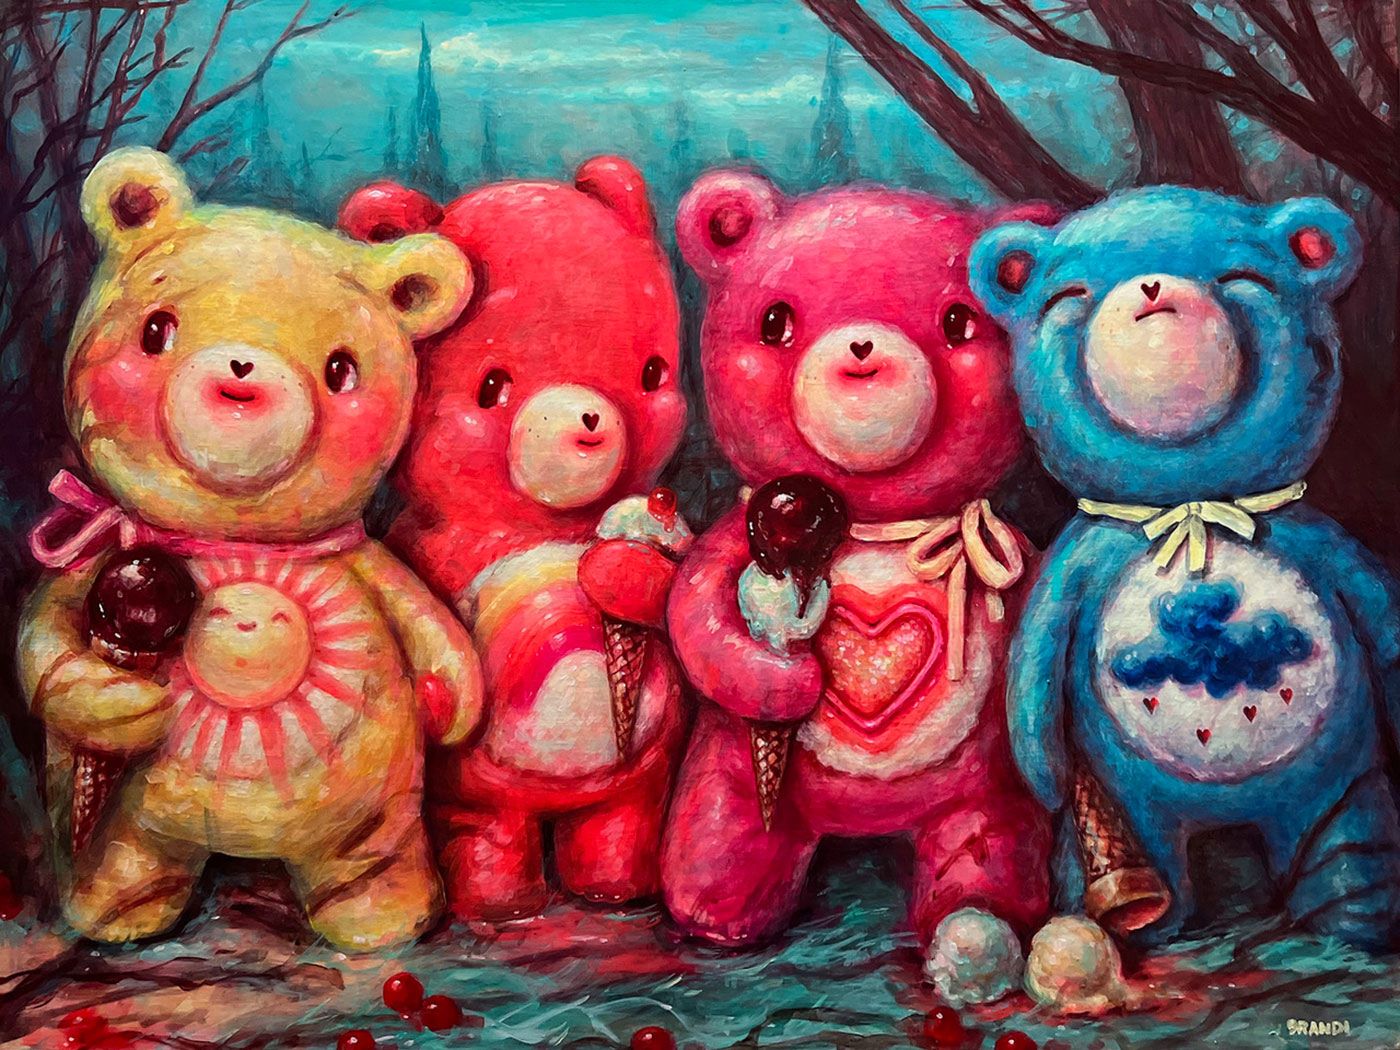 An image of artwork depicting the Care Bears.